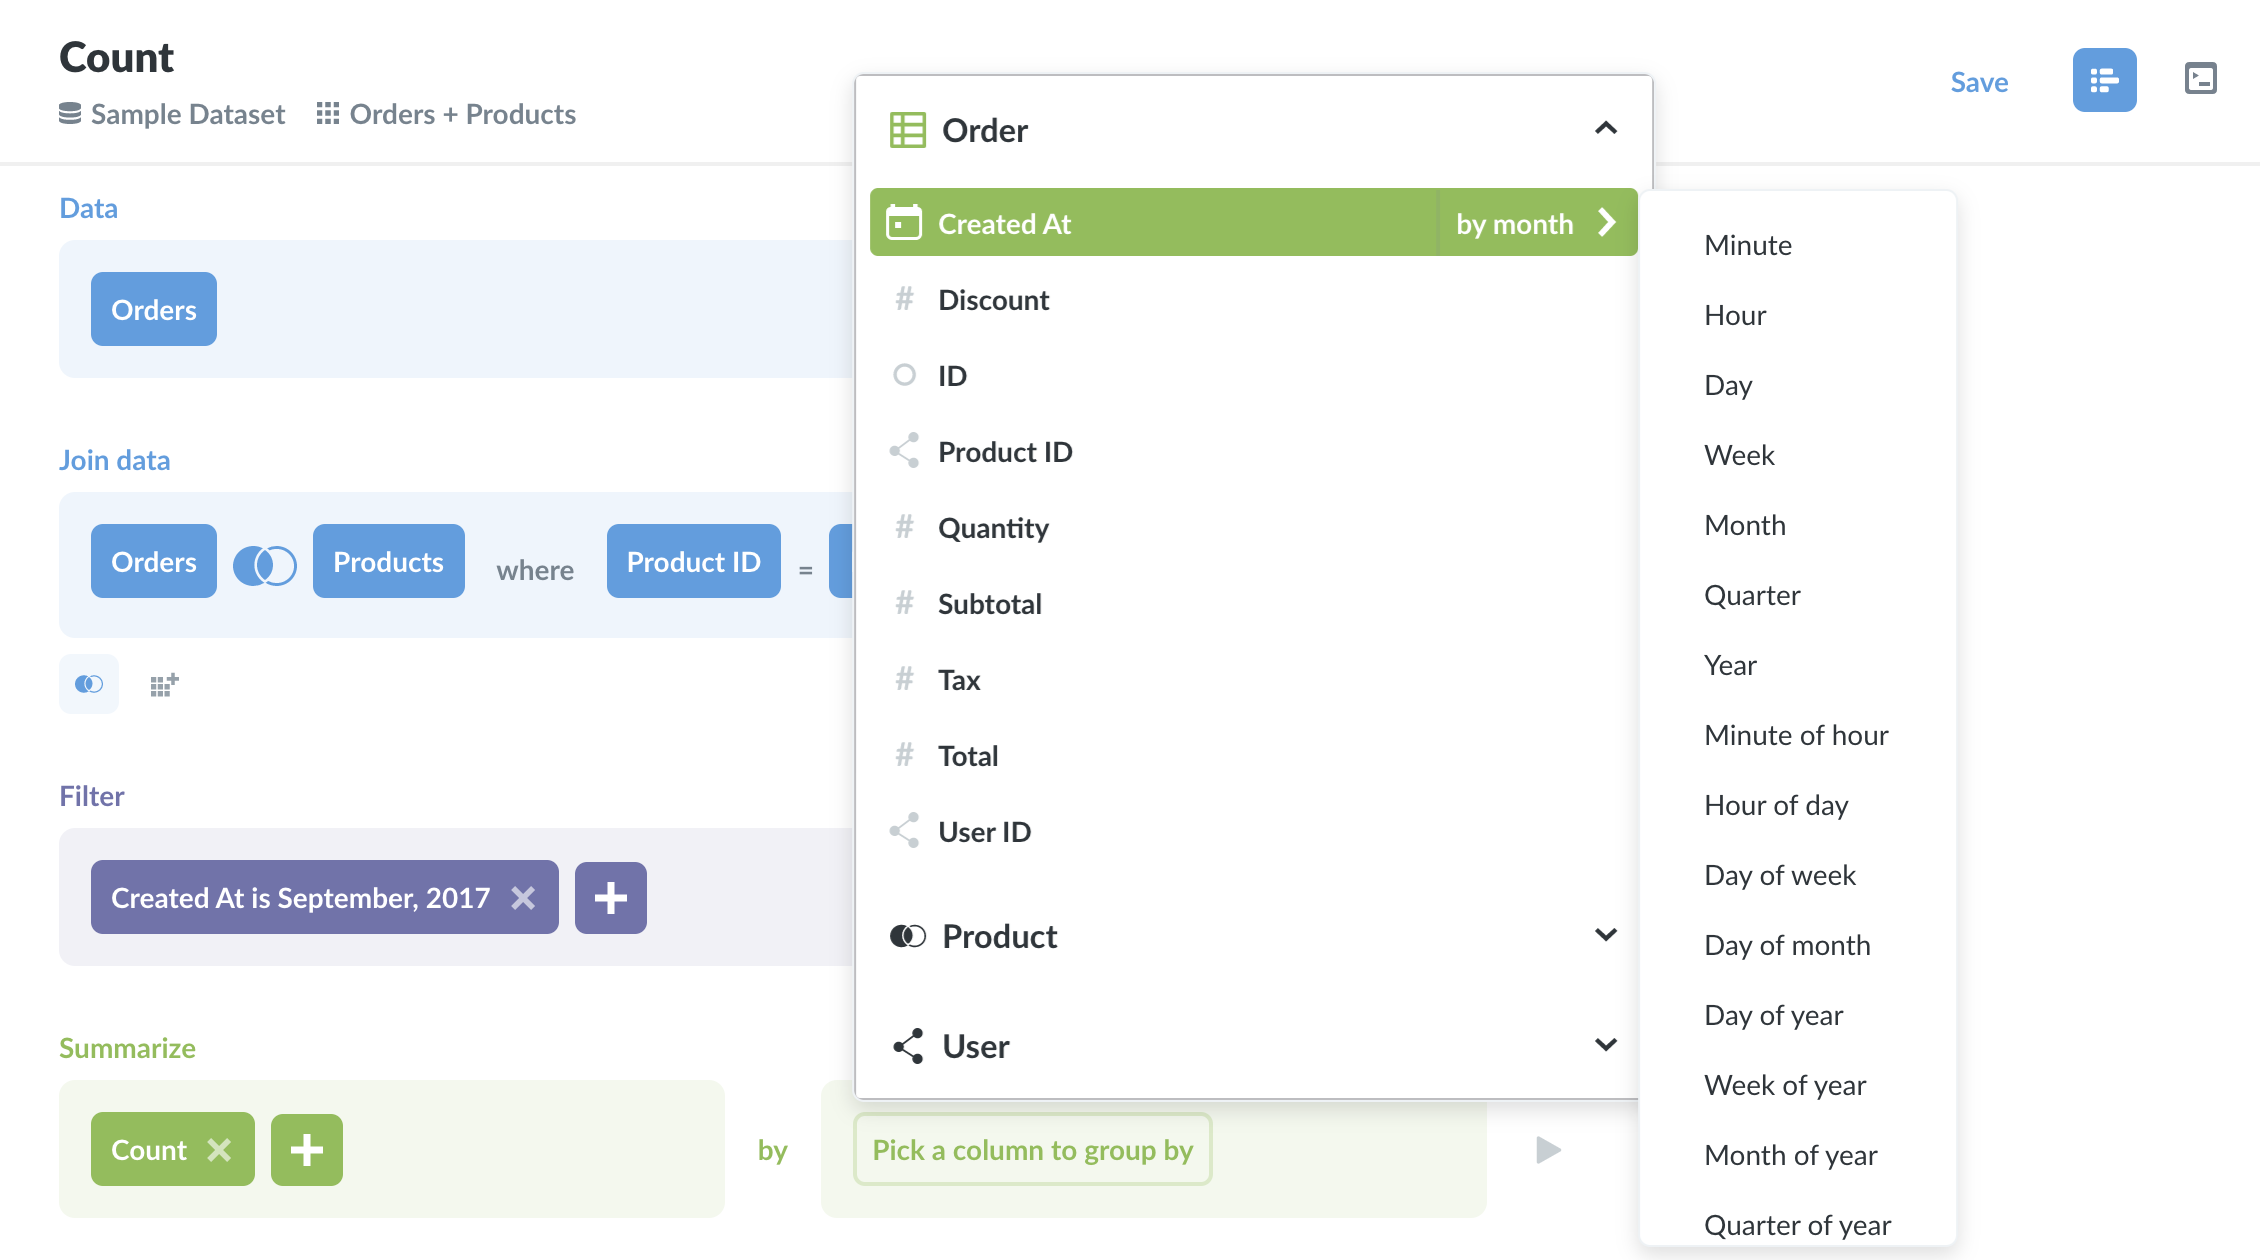 The query builder in Metabase allows people to explore their data and create new questions. They can join data, filter it, summarize it, sort it, use custom expressions, and more.